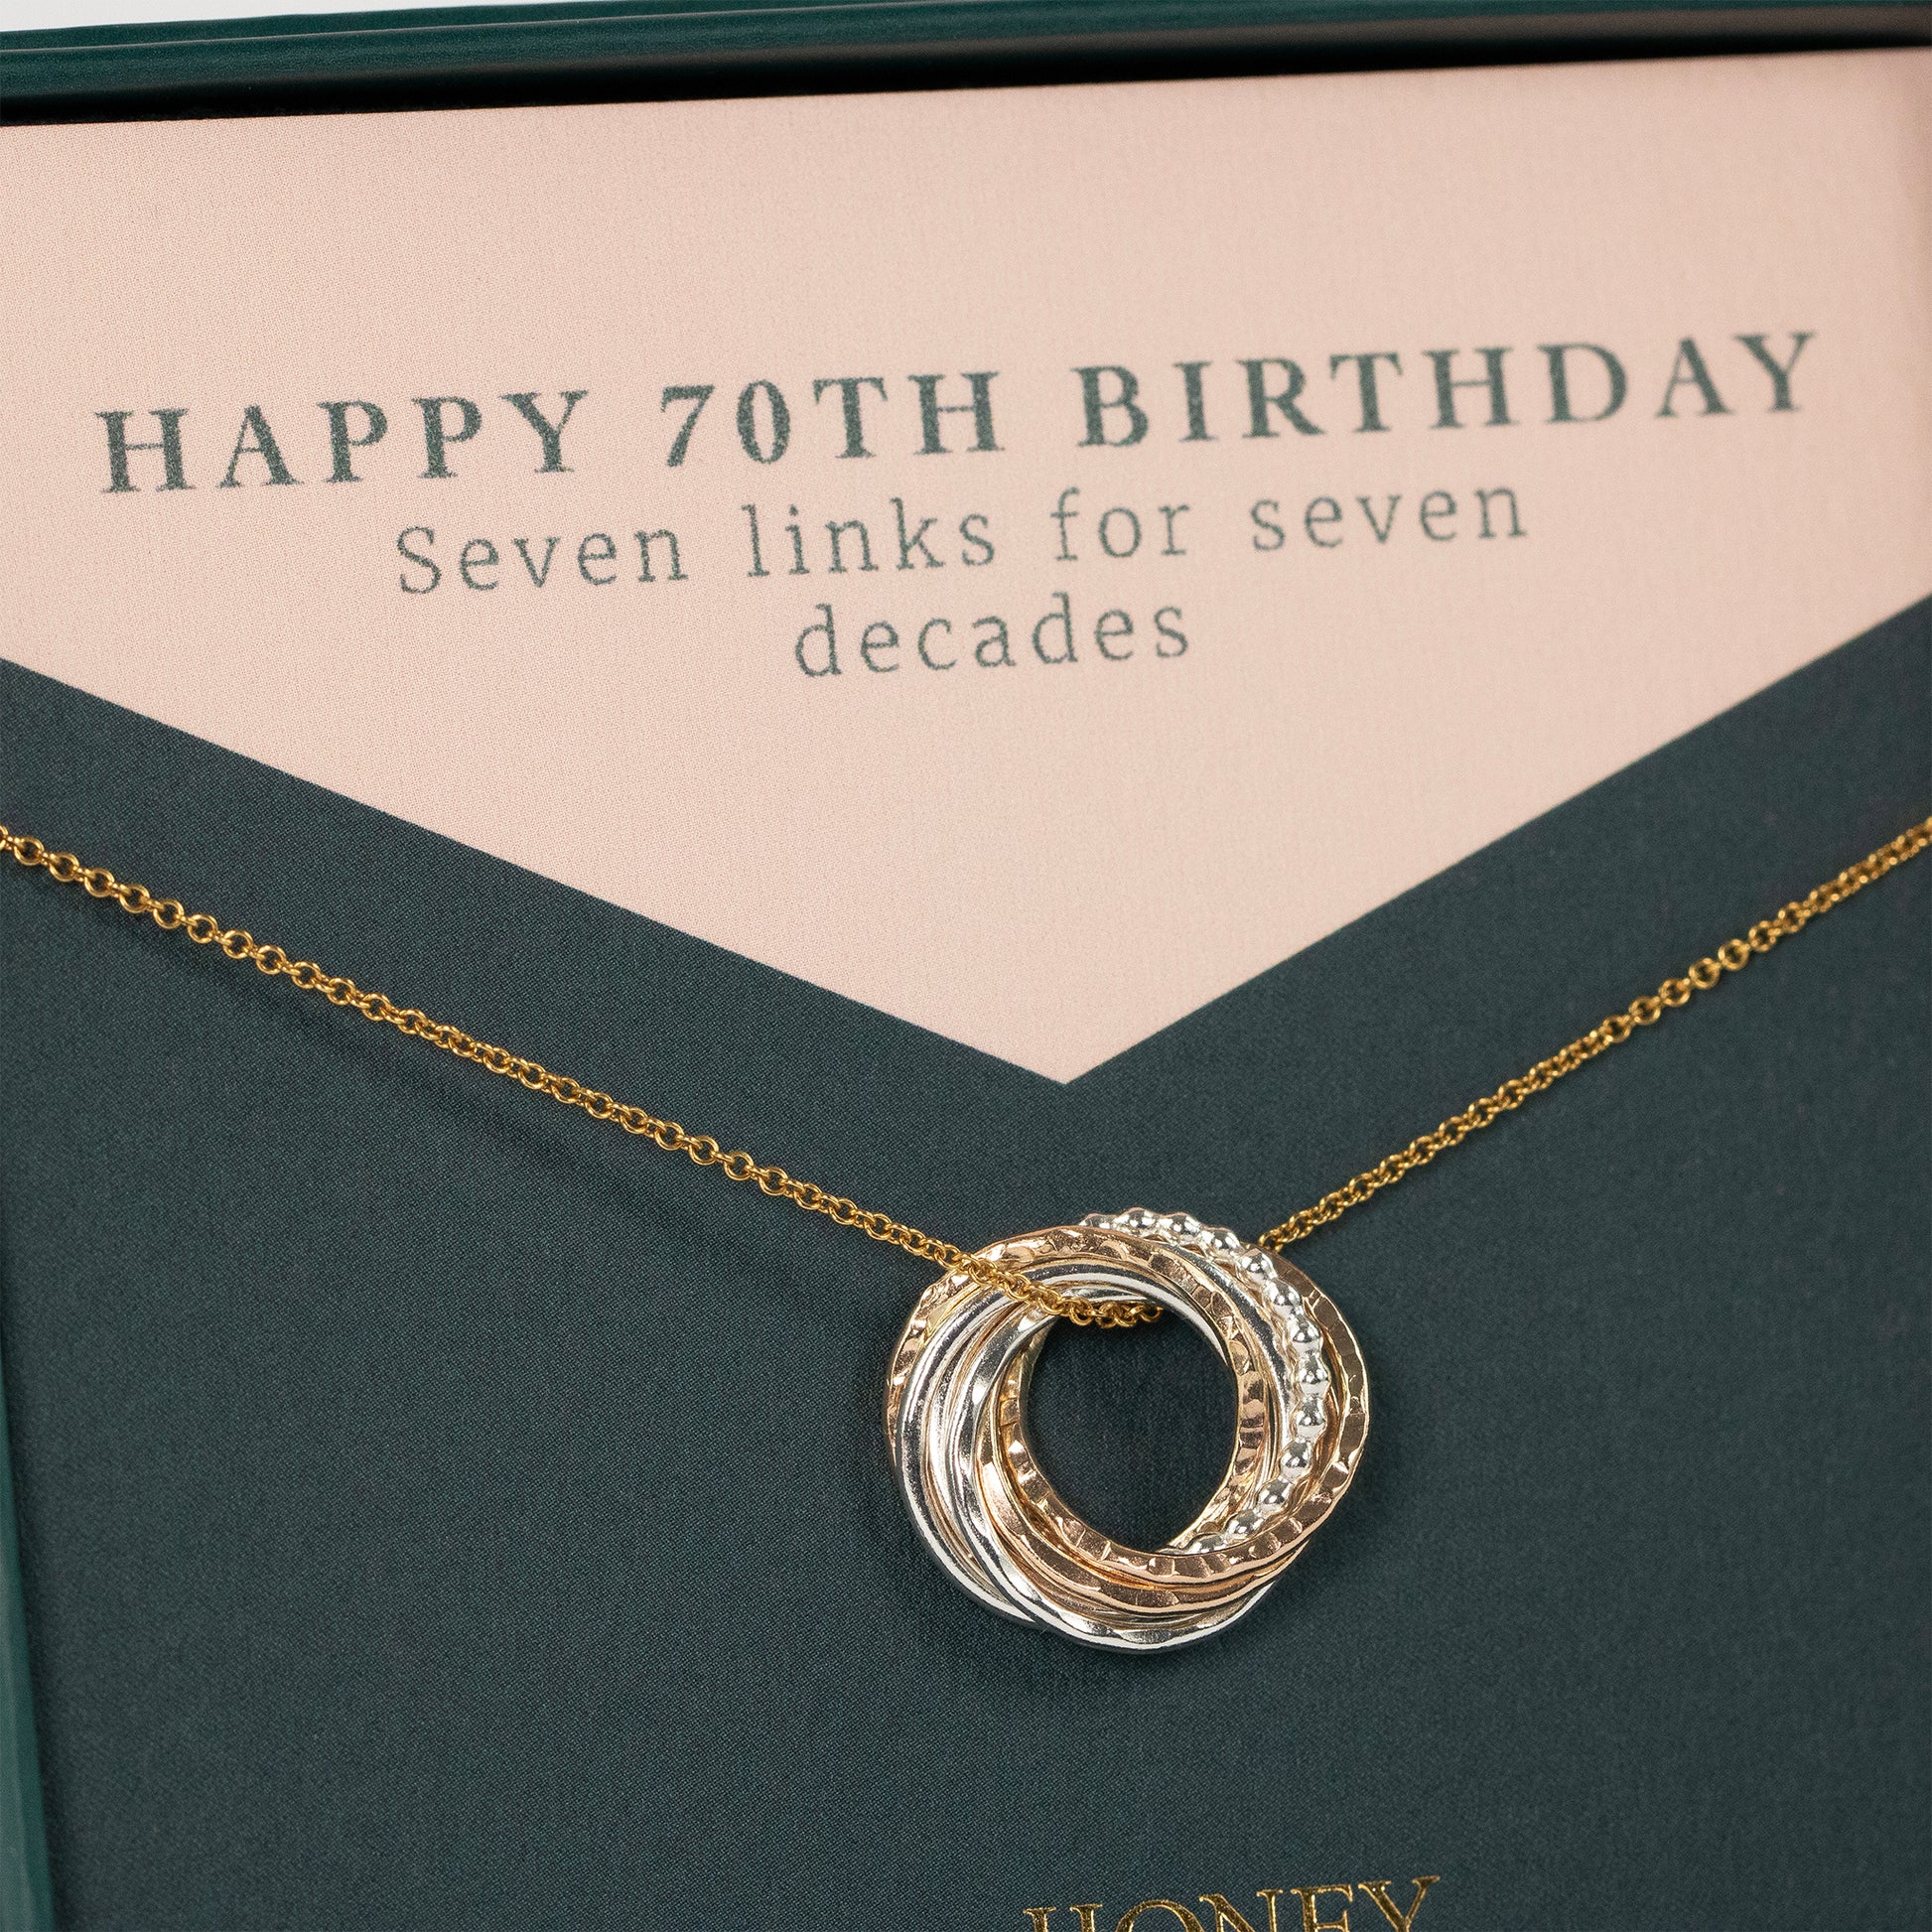 70th Birthday Necklace - The Original 7 Links for 7 Decades Necklace - Petite Silver & Gold